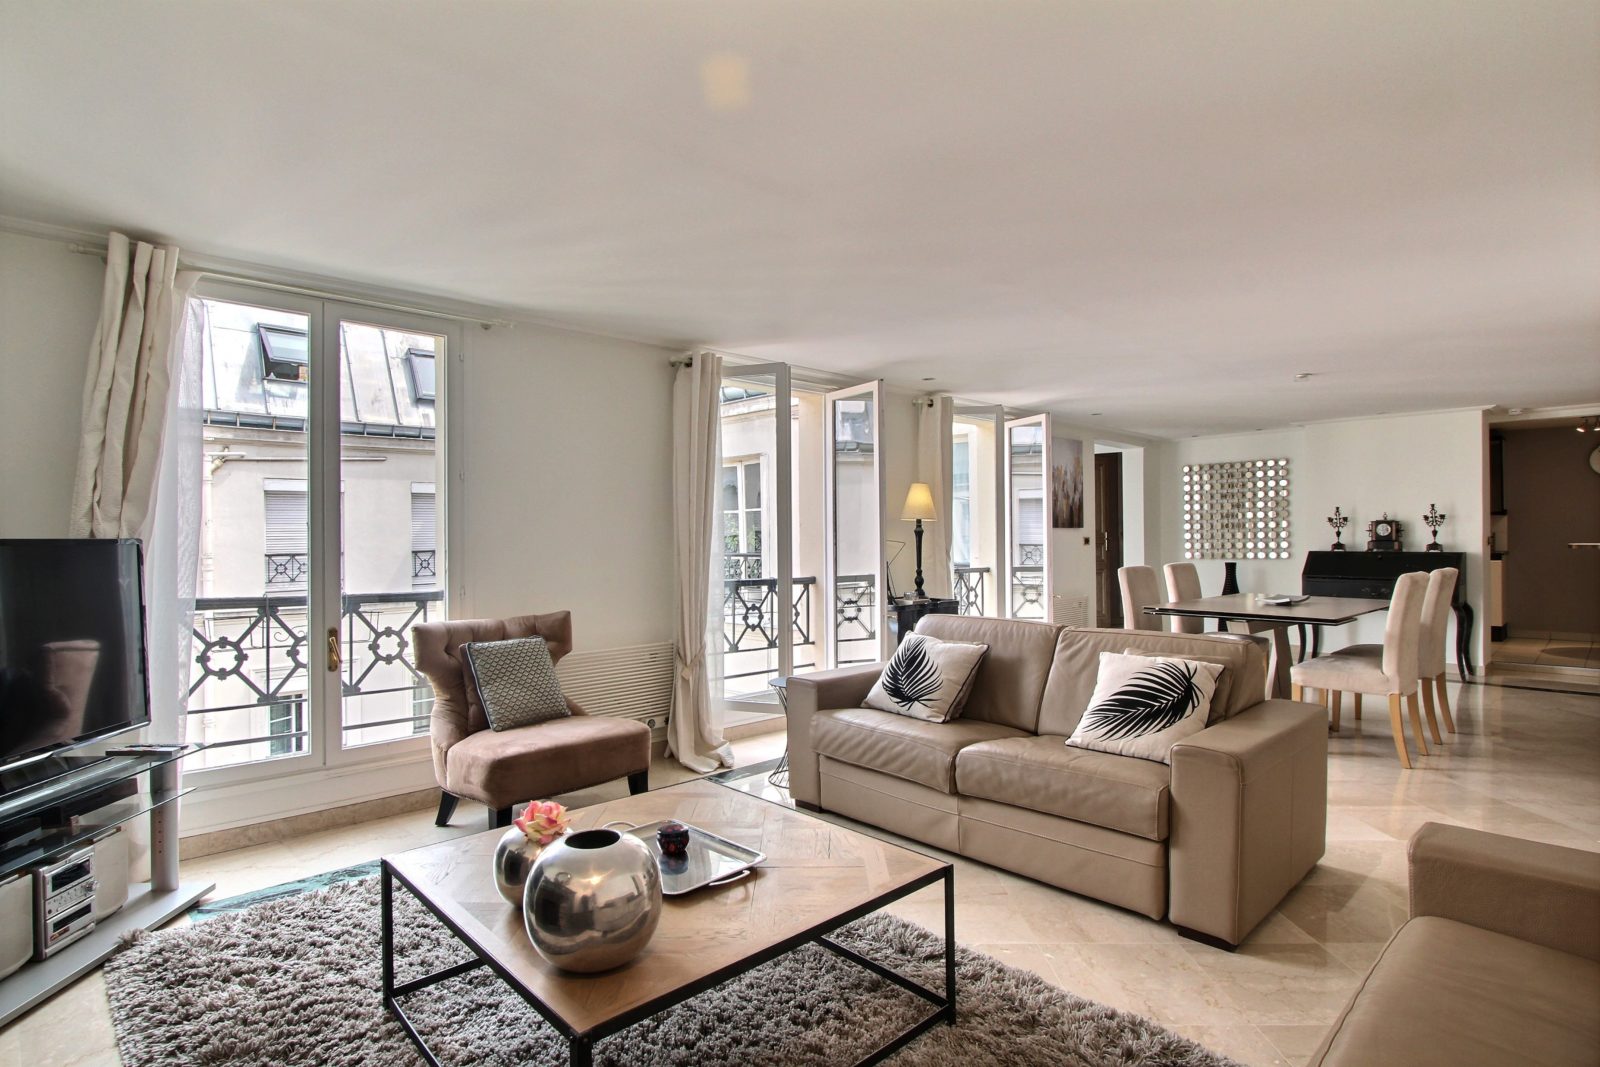 Large 2-bedroom apartment in Madeleine